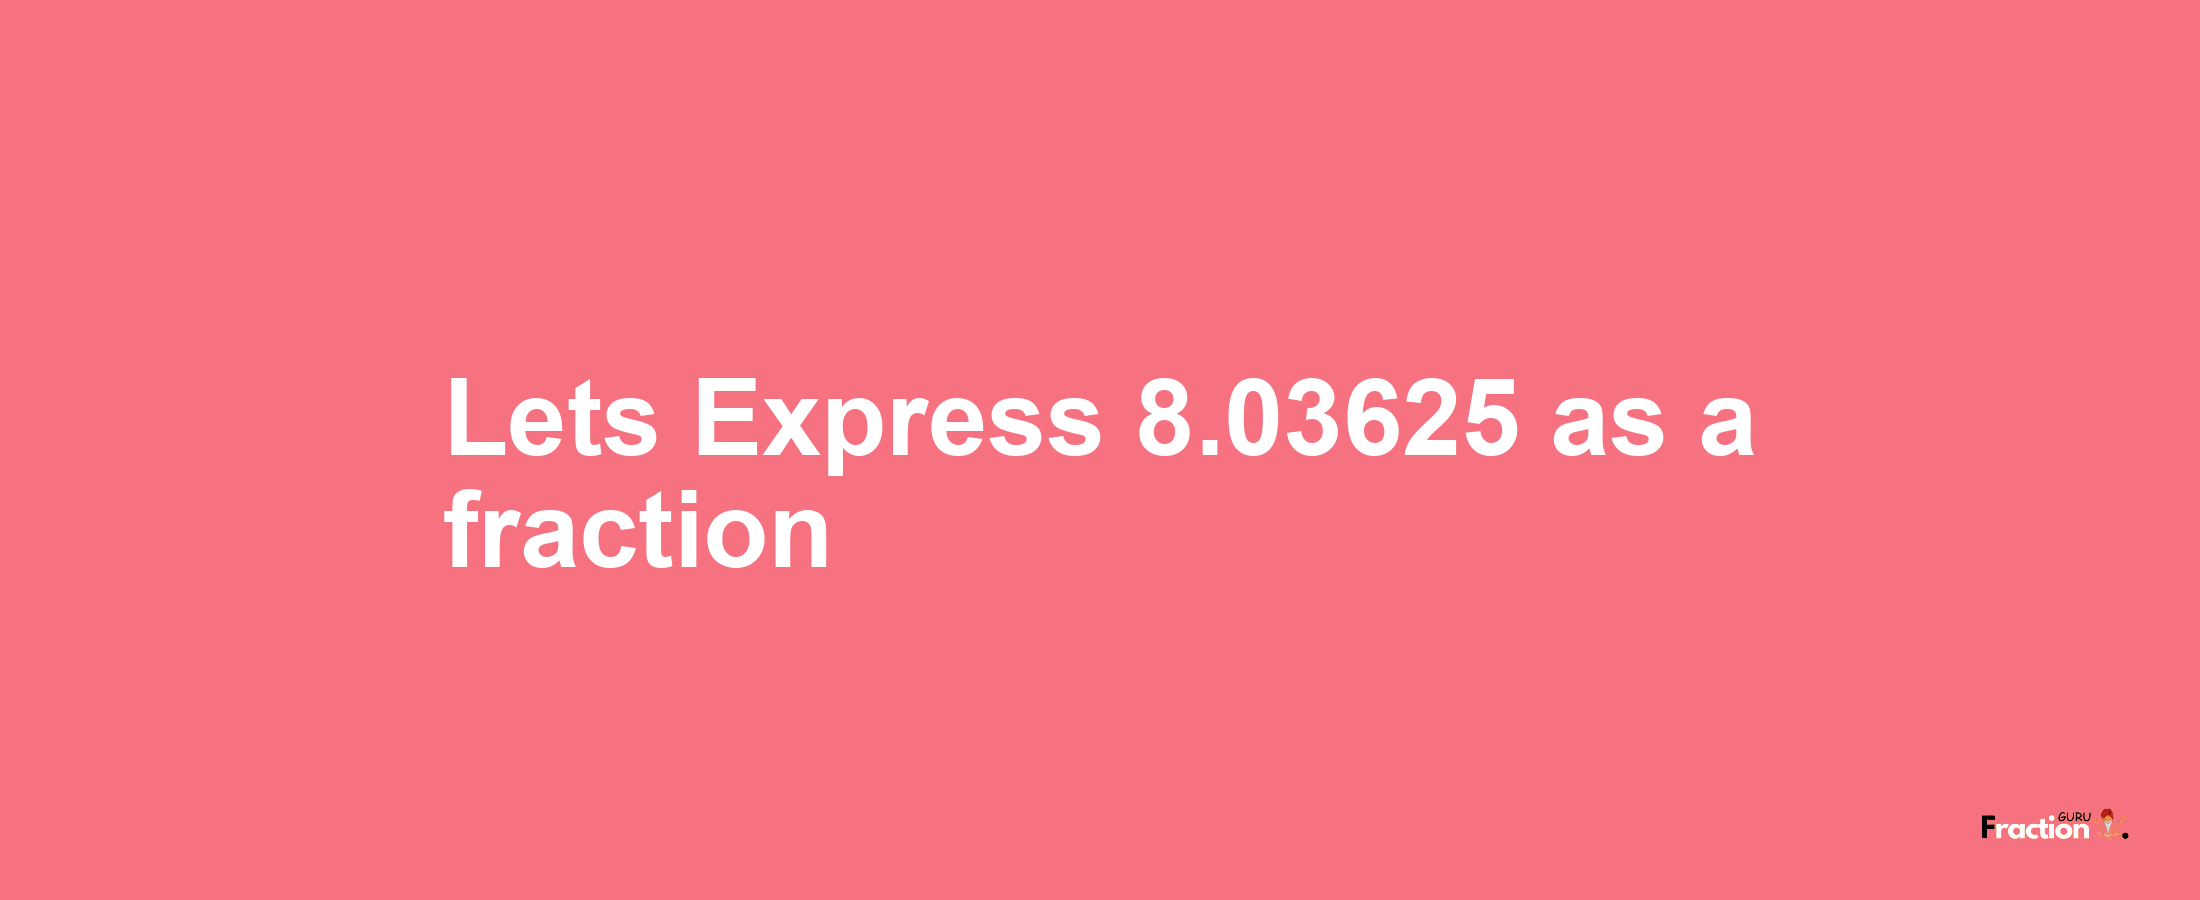 Lets Express 8.03625 as afraction